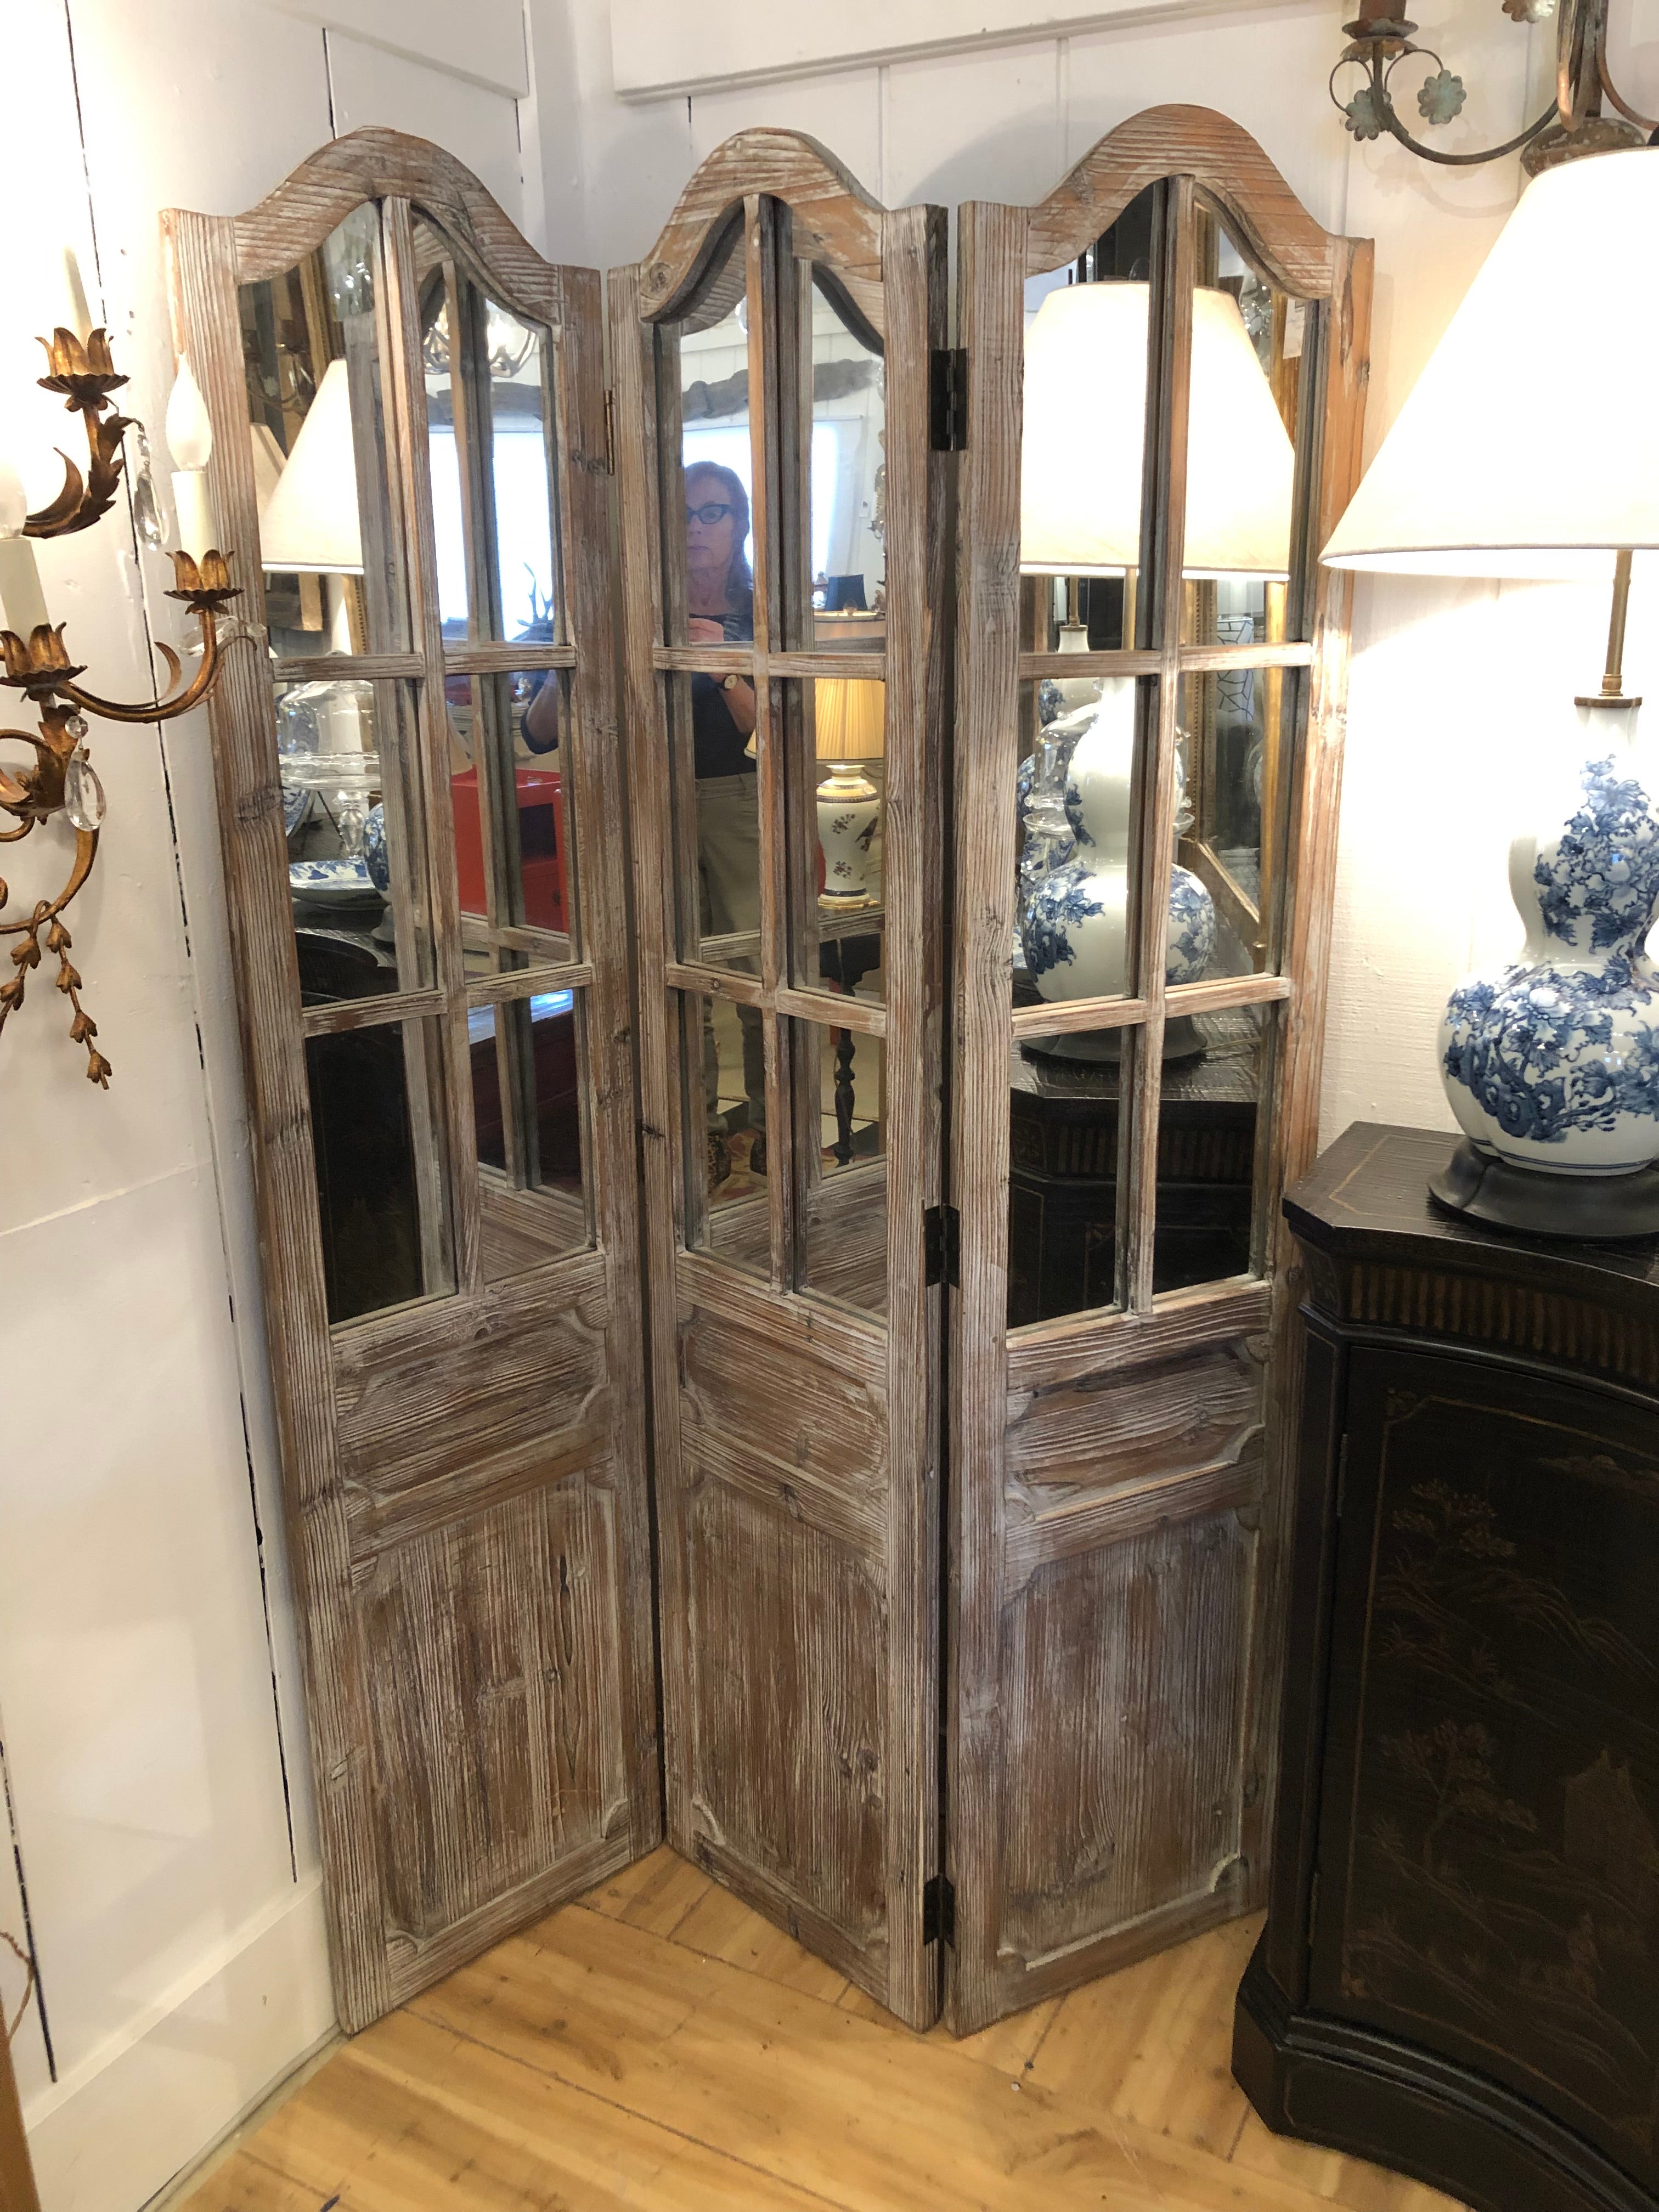 Attractive distressed wood and mirrored 3 panel screen having elegantly curved tops and carved panels. Color of wood is a pickled or cerused look. Very neutral.
Note: Pair available.